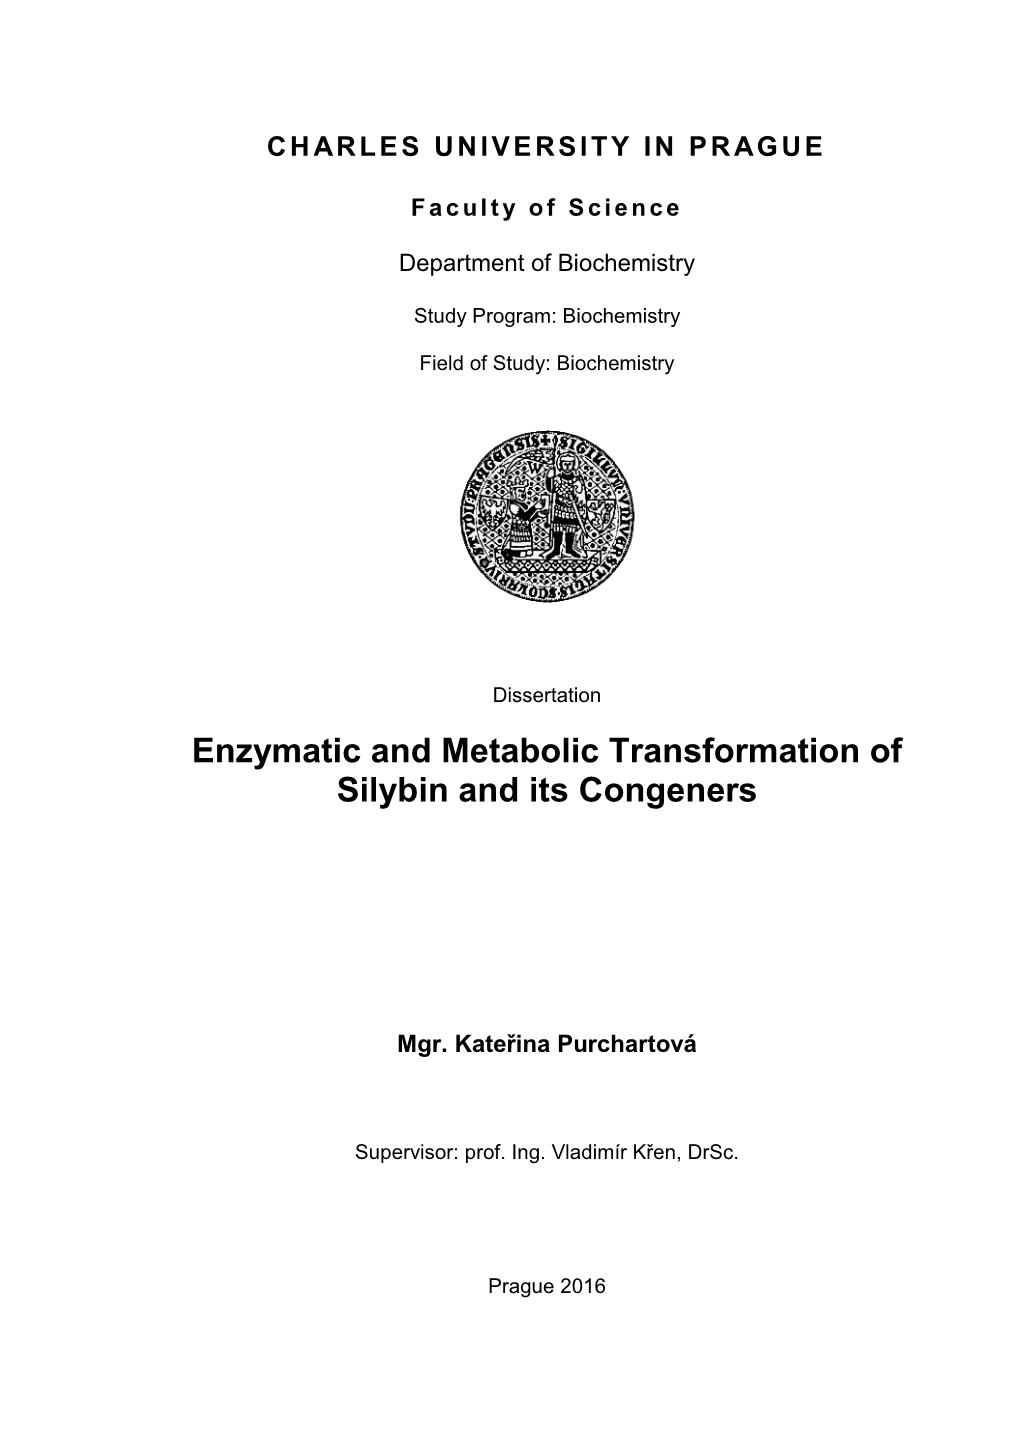 Enzymatic and Metabolic Transformation of Silybin and Its Congeners